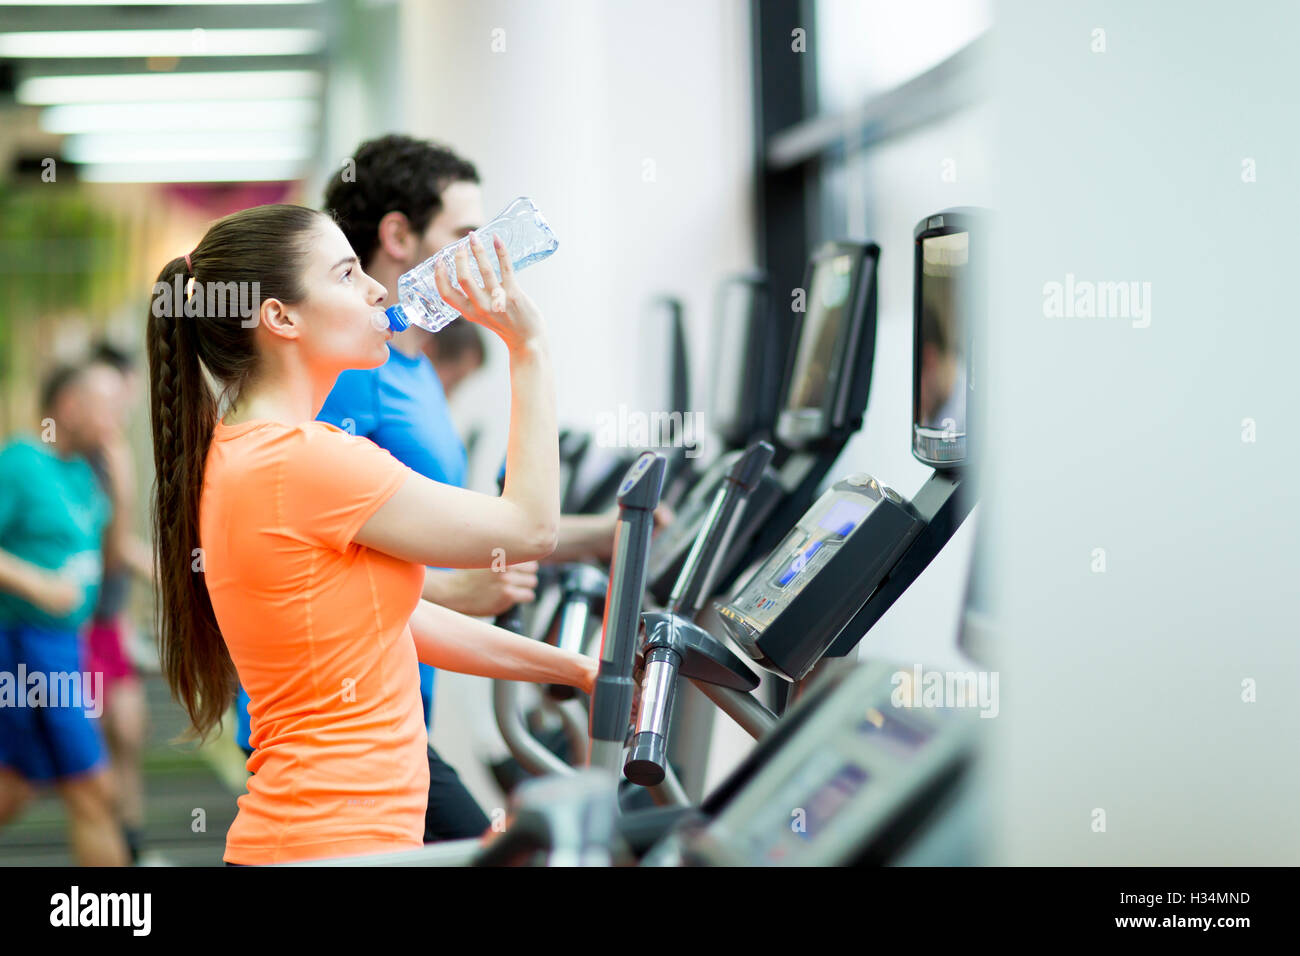 https://c8.alamy.com/comp/H34MND/handsome-young-people-training-on-the-treadmill-in-the-gym-H34MND.jpg